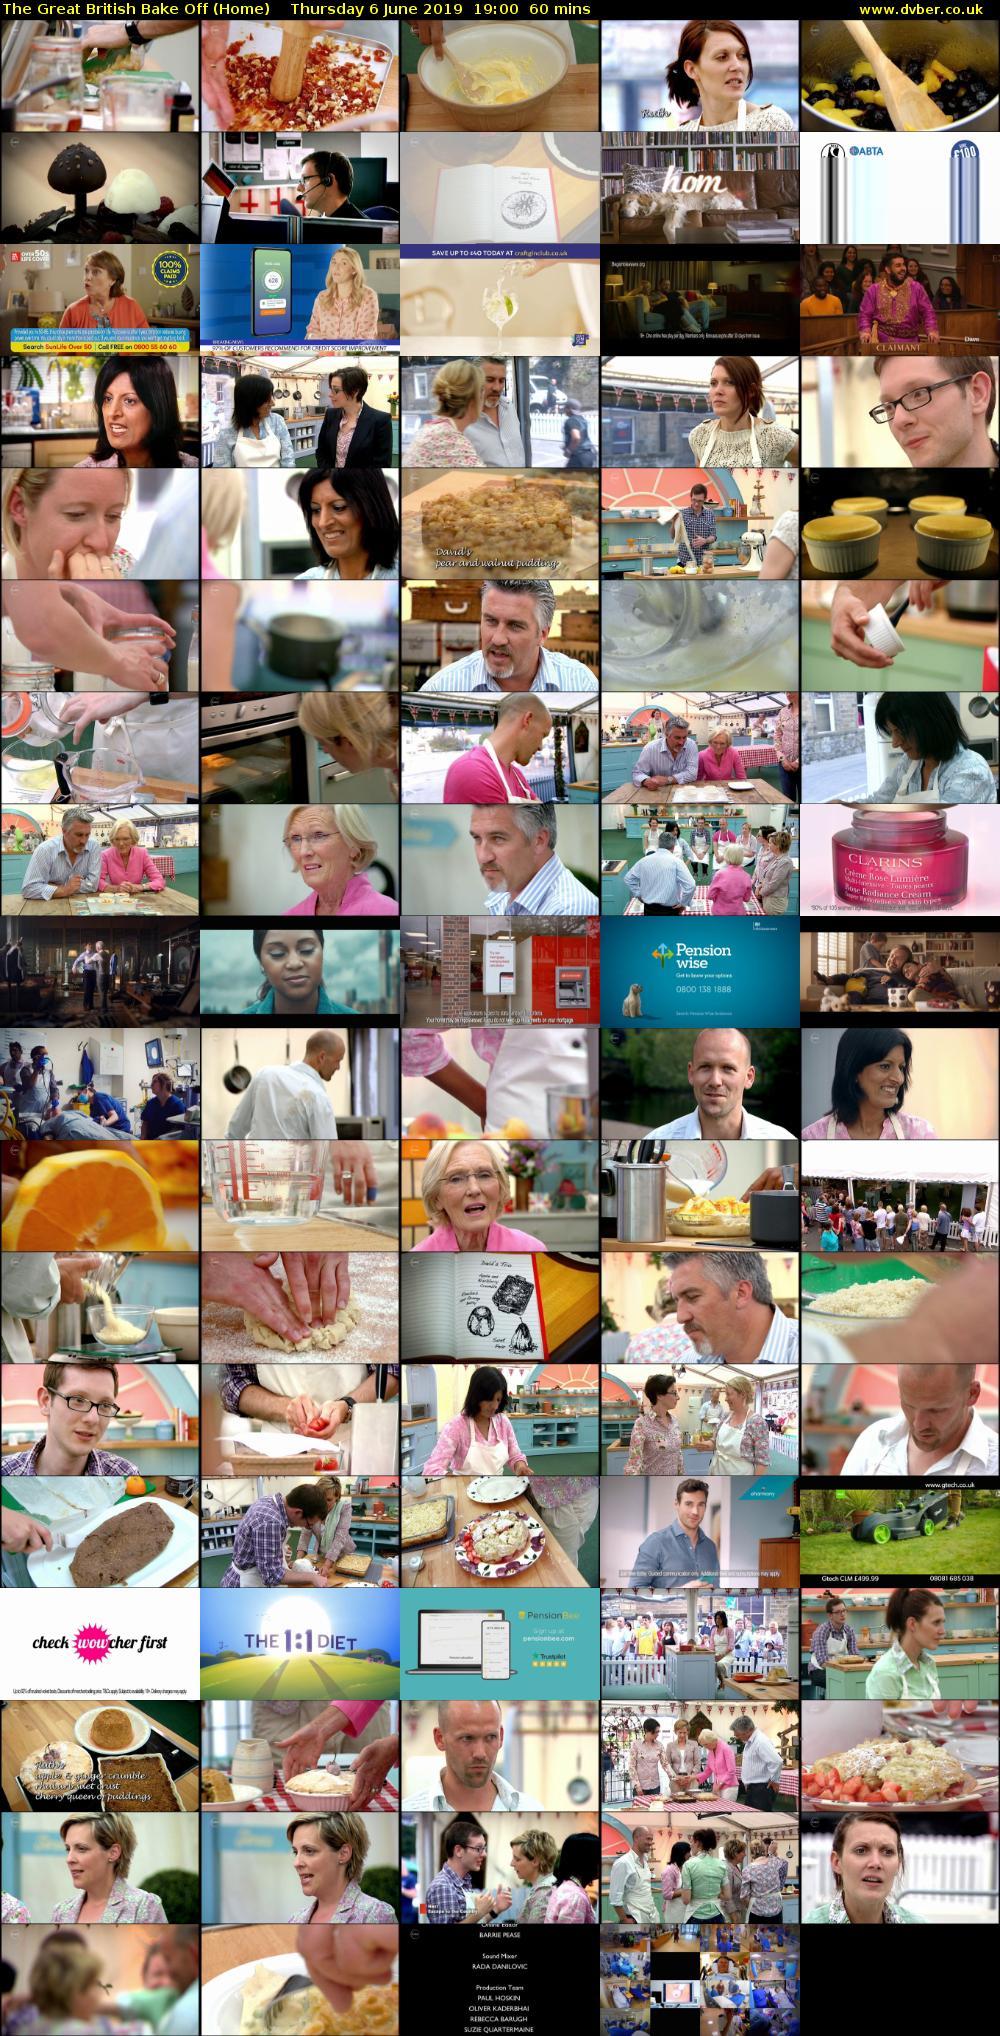 The Great British Bake Off (Home) Thursday 6 June 2019 19:00 - 20:00